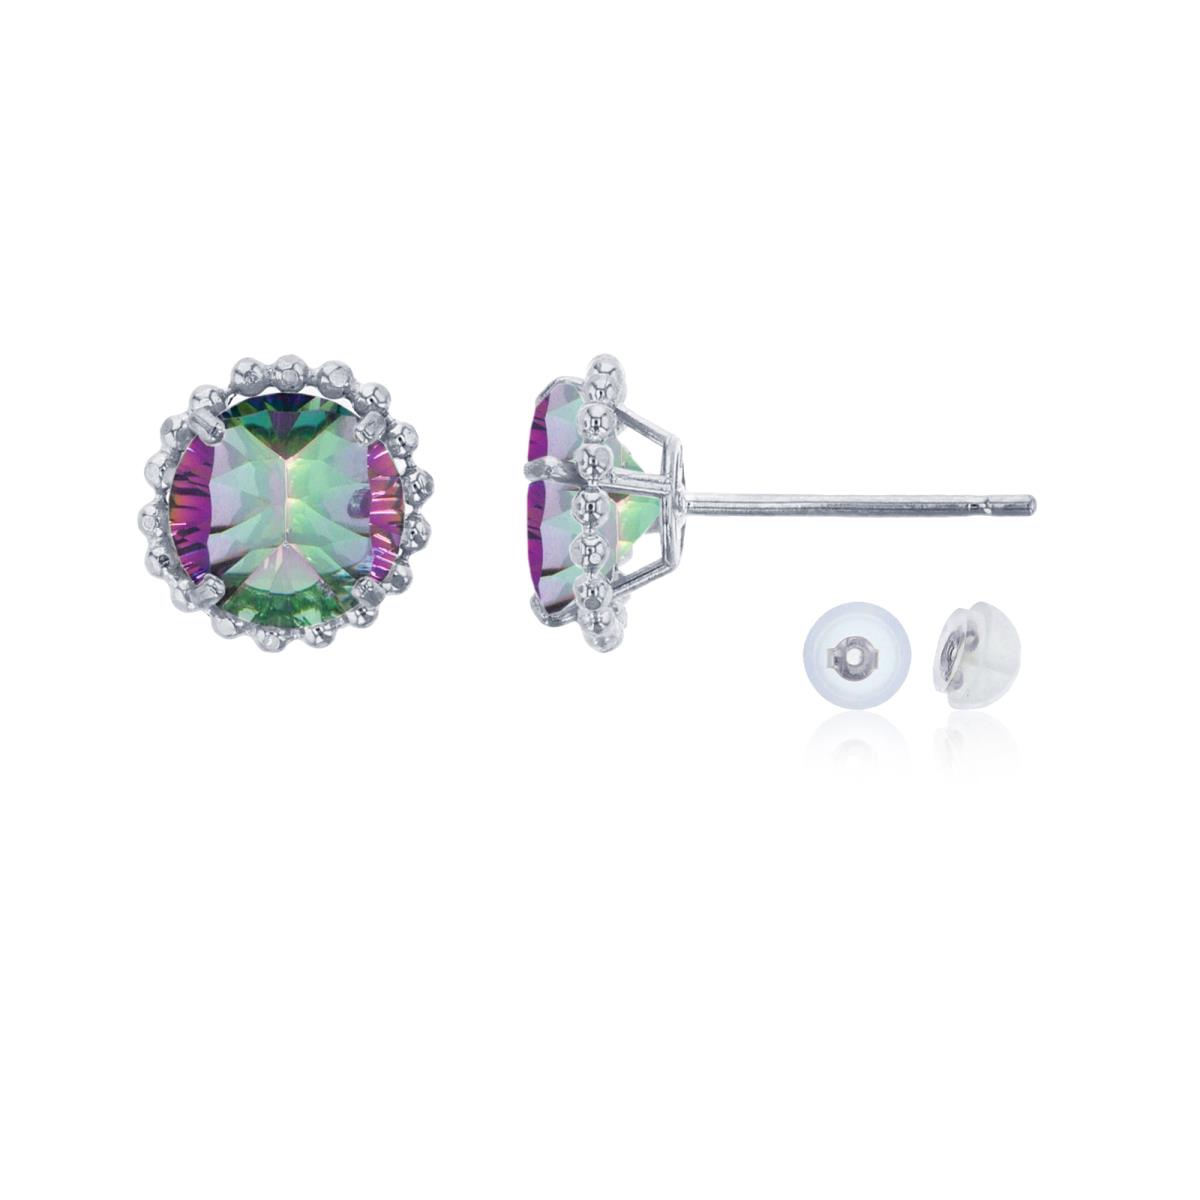 10K White Gold 5mm Rd Mystic Green Topaz with Bead Frame Stud Earring with Silicone Back